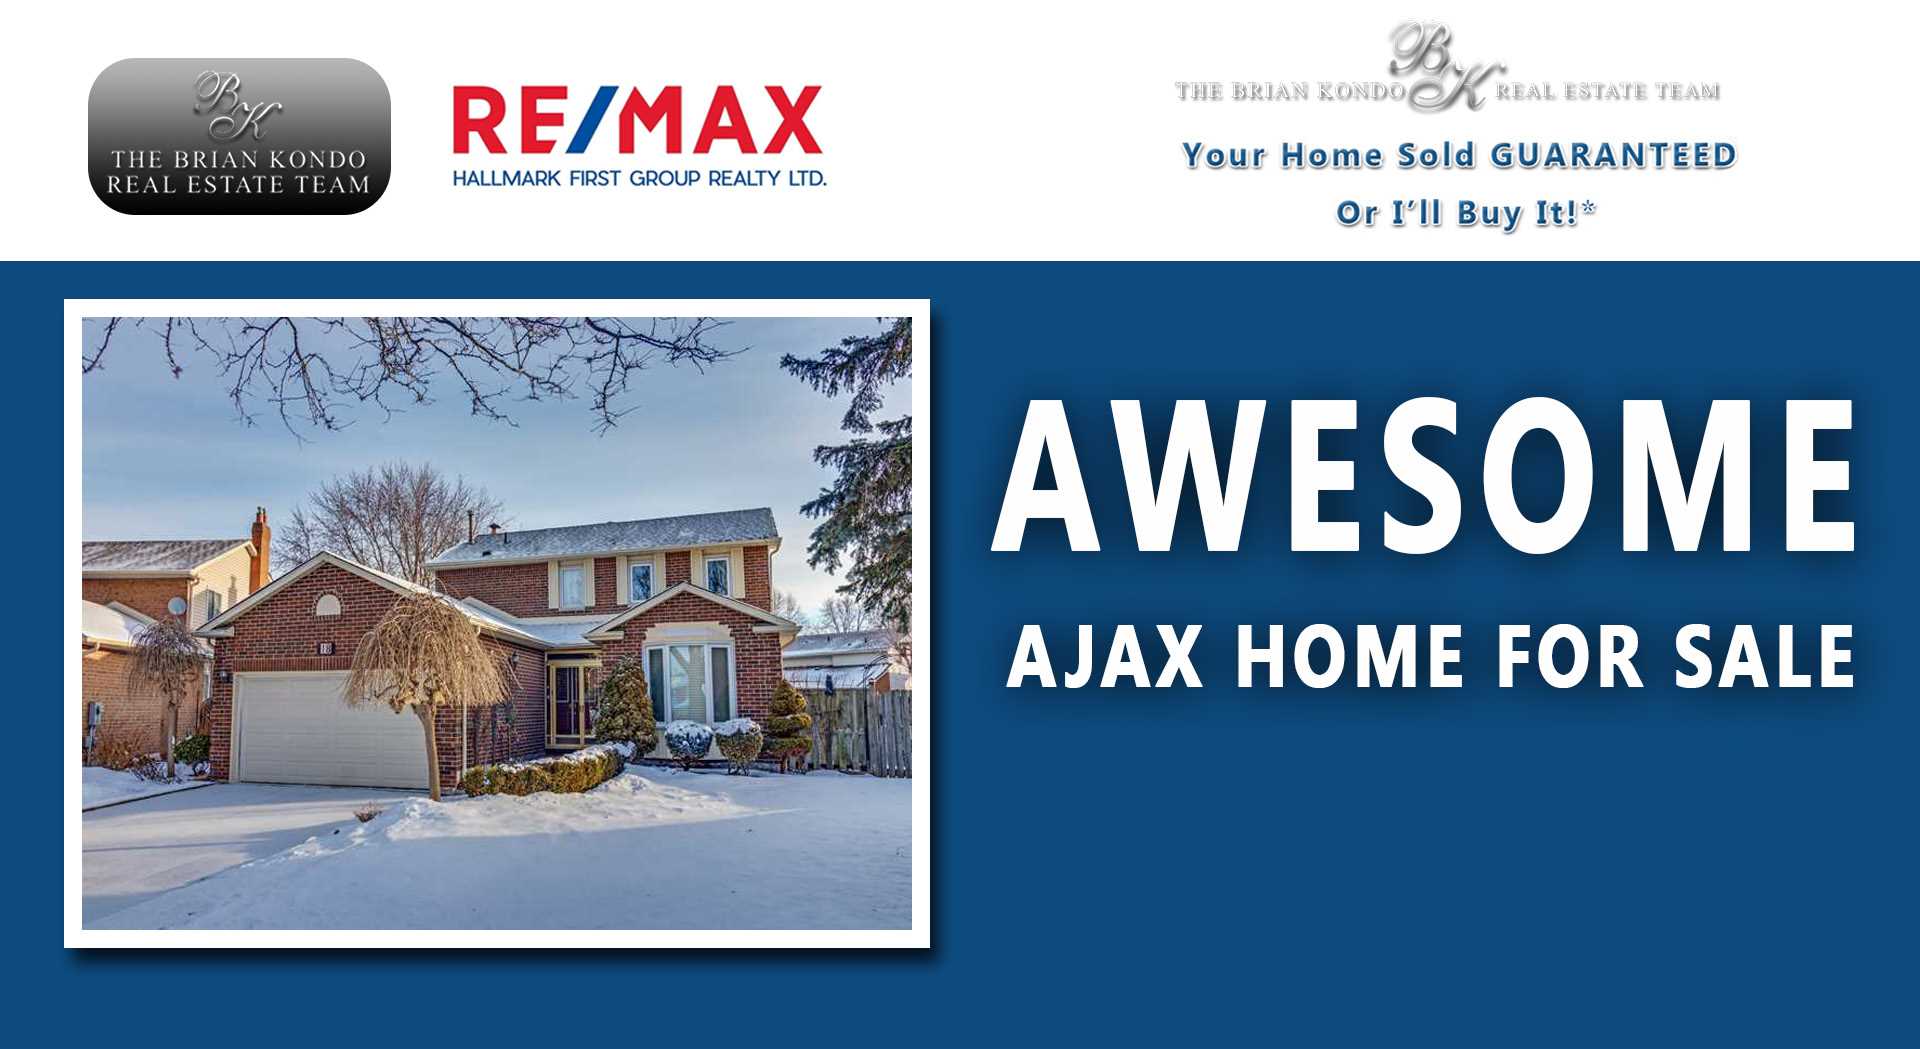 AWESOME AJAX HOME FOR SALE! - $999,000 | The Brian Kondo Real Estate Team